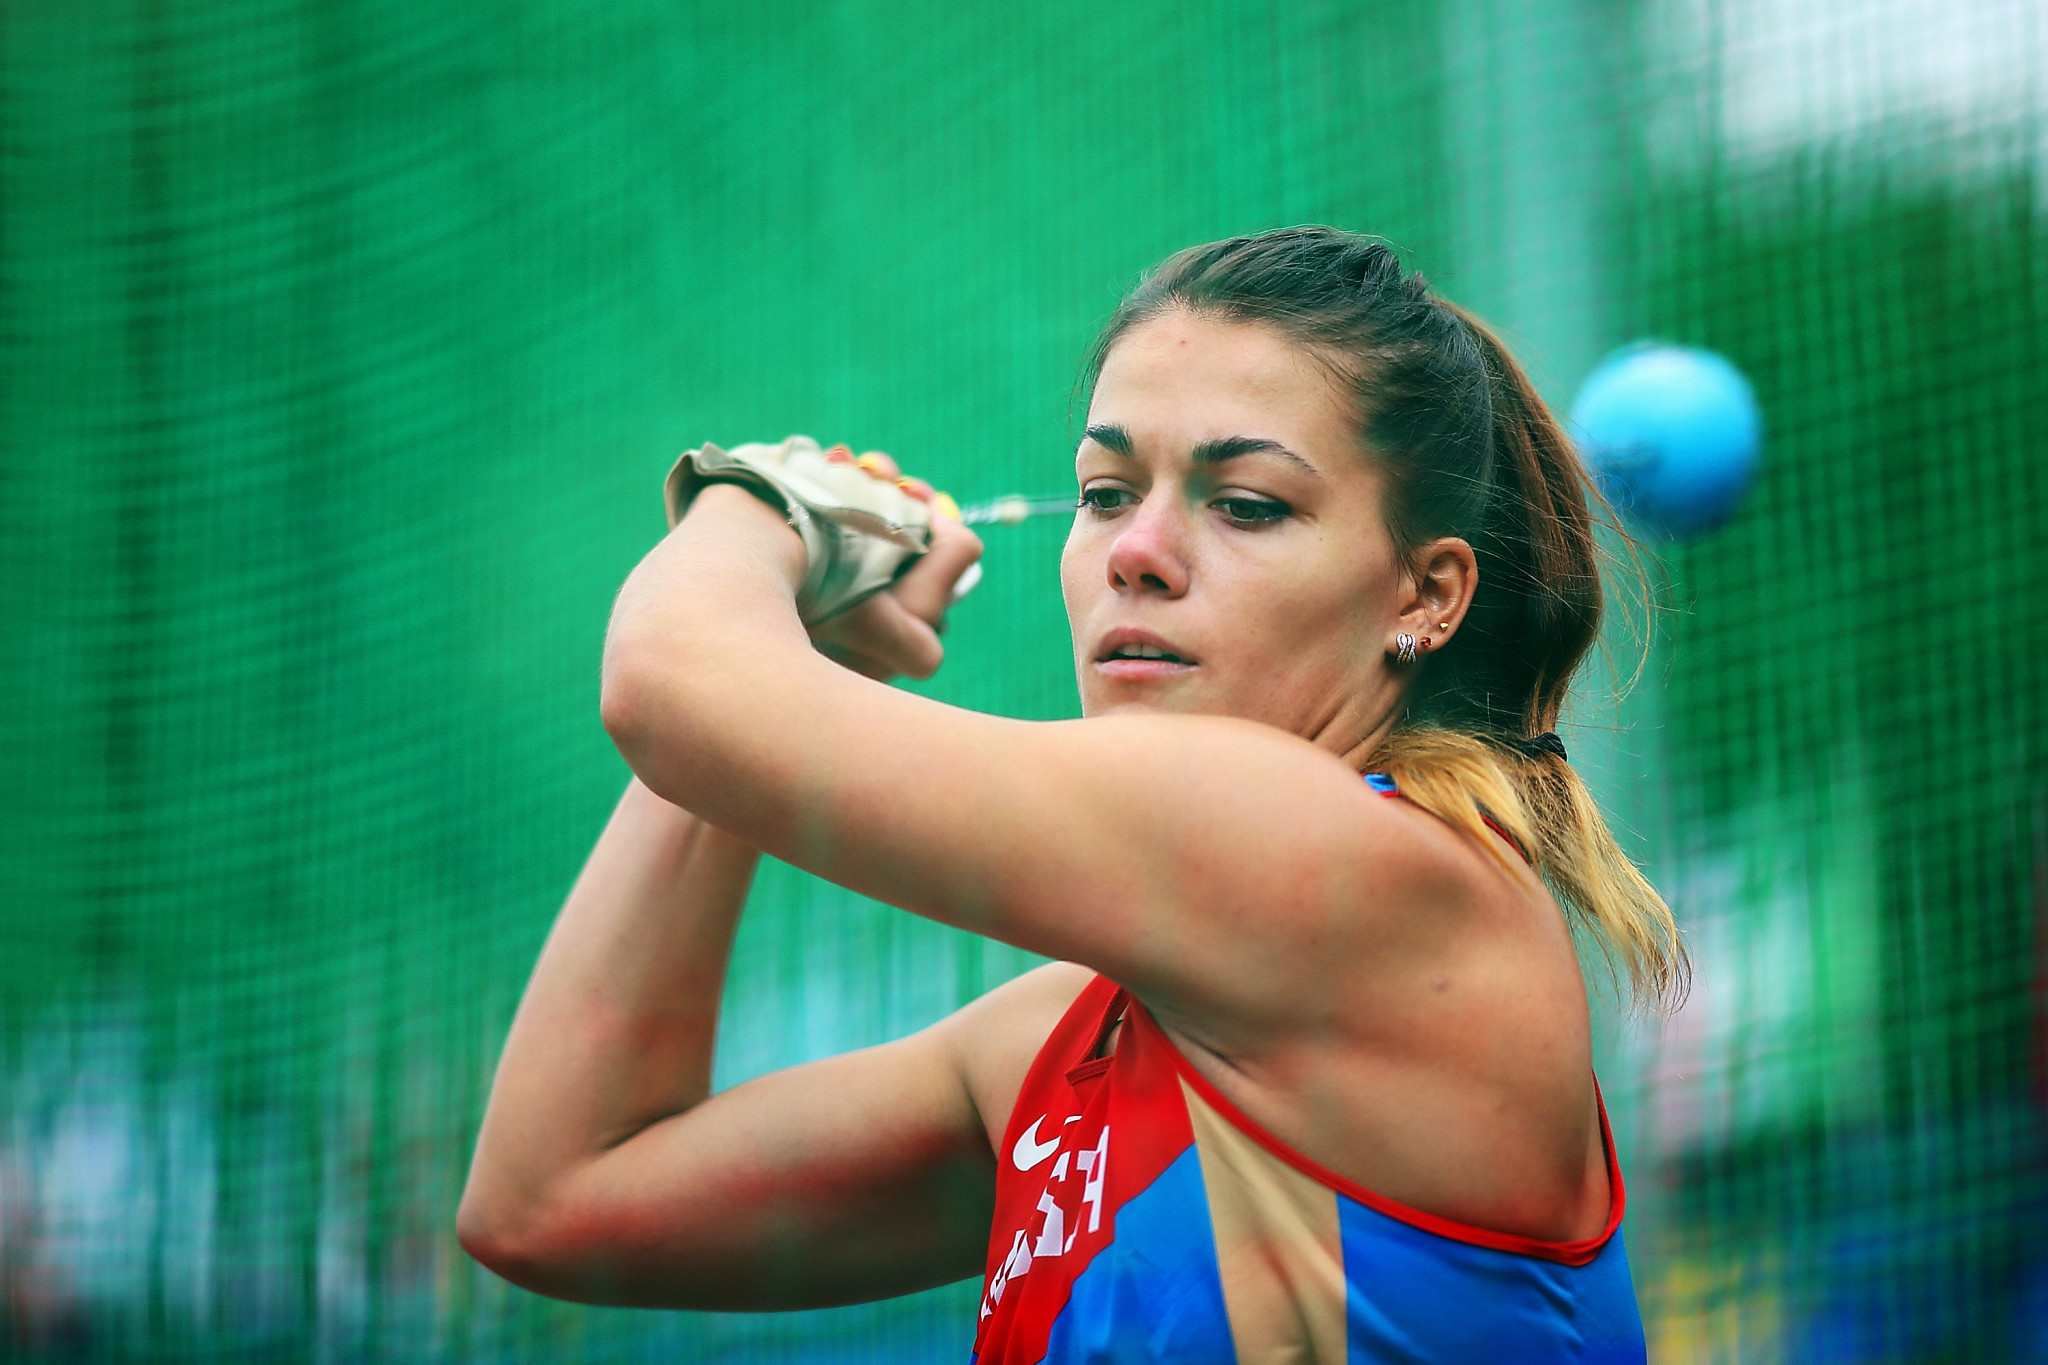 Hammer thrower Yelizaveta Tsareva is among the five Russian athletes to have had an application approved by the IAAF to compete neutrally in 2018 ©Getty Images